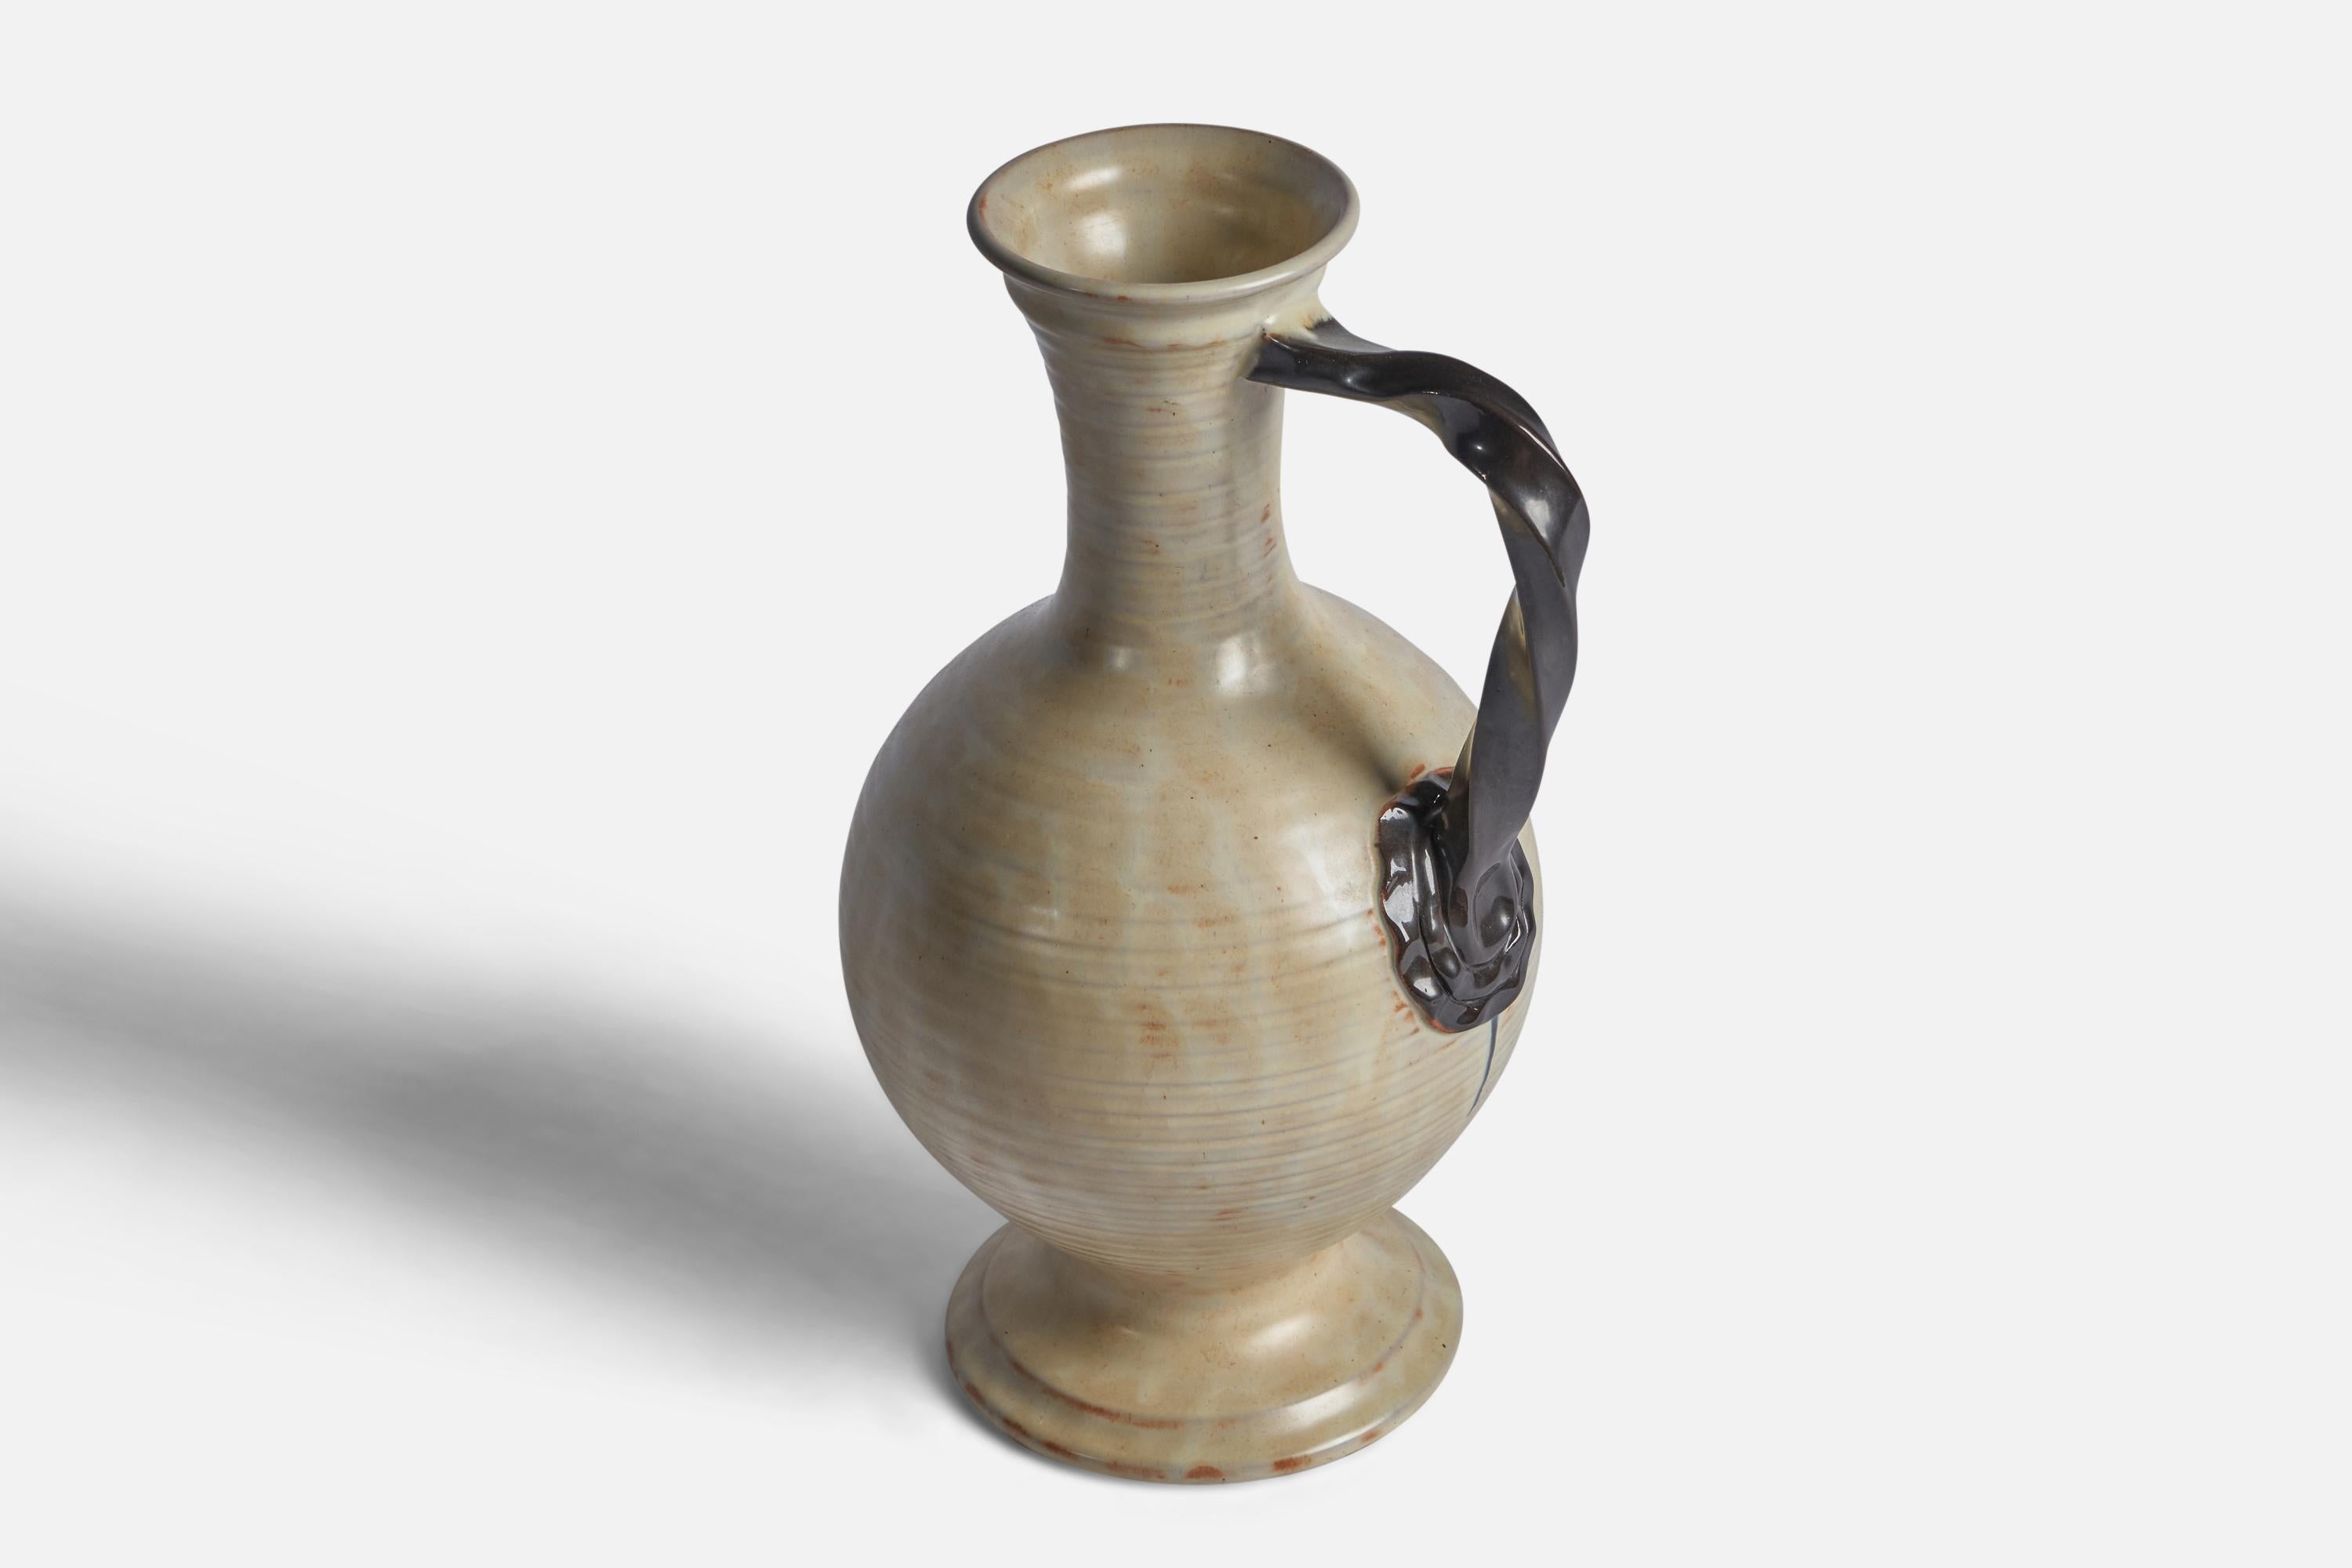 An early modernist vase or pitcher. Produced by Upsala-Ekeby, Sweden, 1940s.


Other designers of the period include Ettore Sottsass, Carl Harry Stålhane, Lisa Larsson, Axel Salto, and Arne Bang.